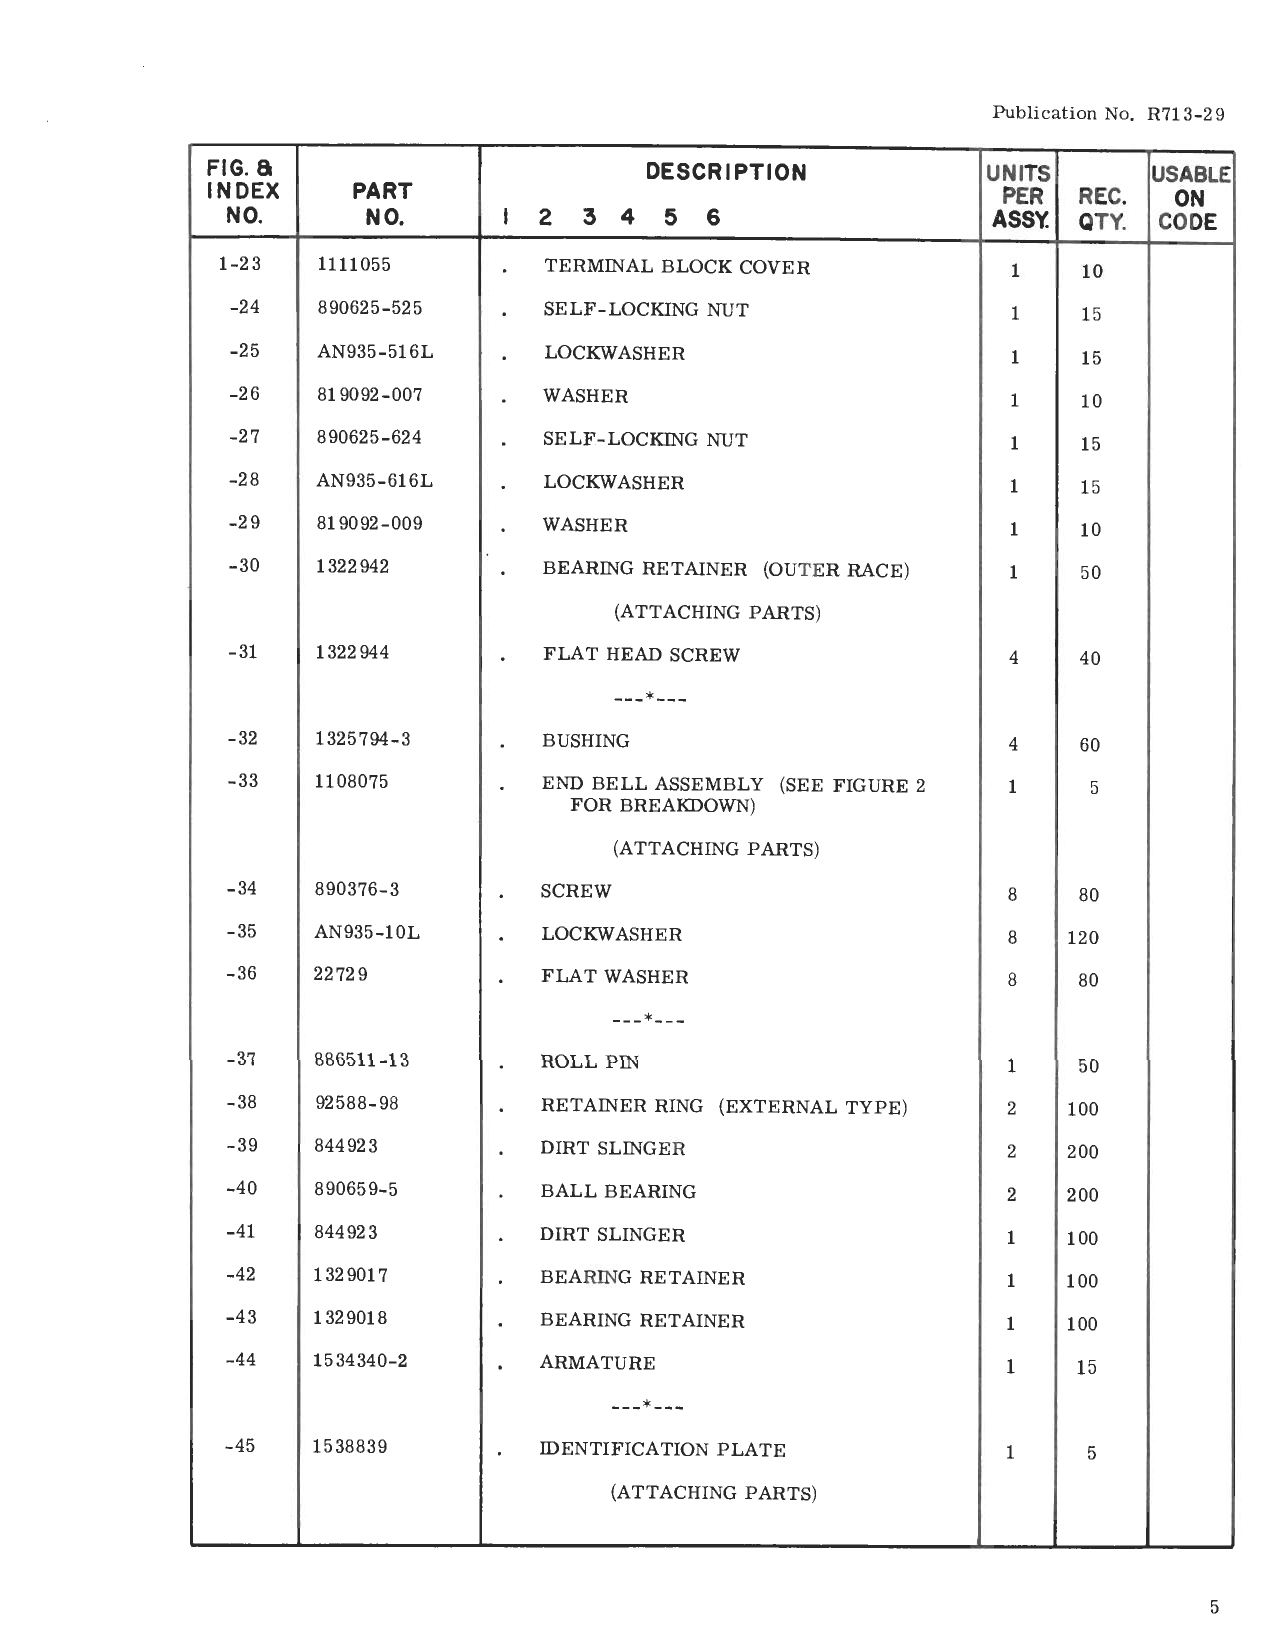 Sample page 5 from AirCorps Library document: Illustrated Parts List for Starter Generator - Type 30B58-1-A 